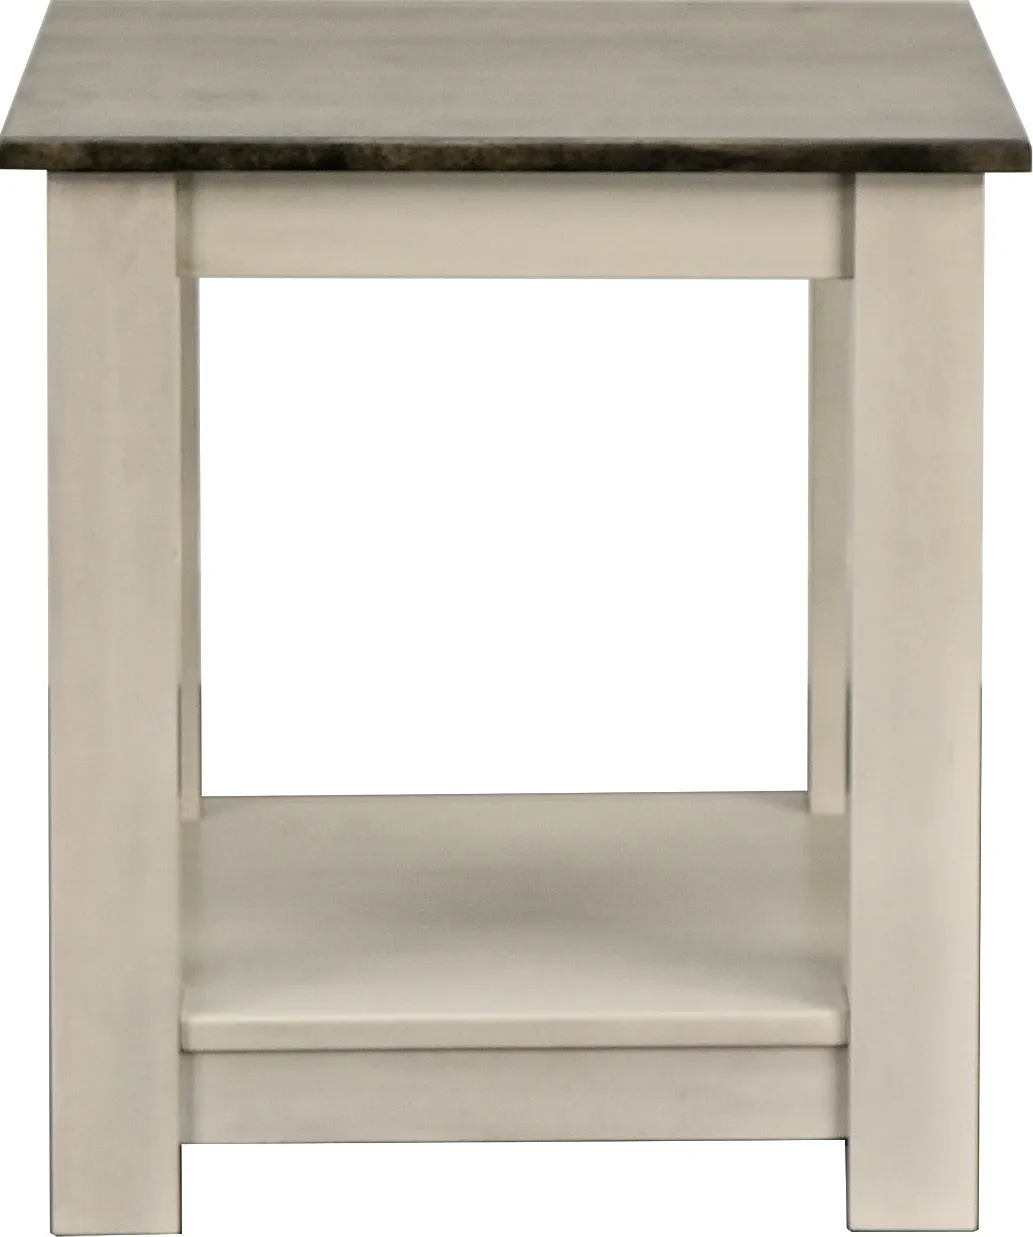 Canadel 2422 SHELF END TABLE